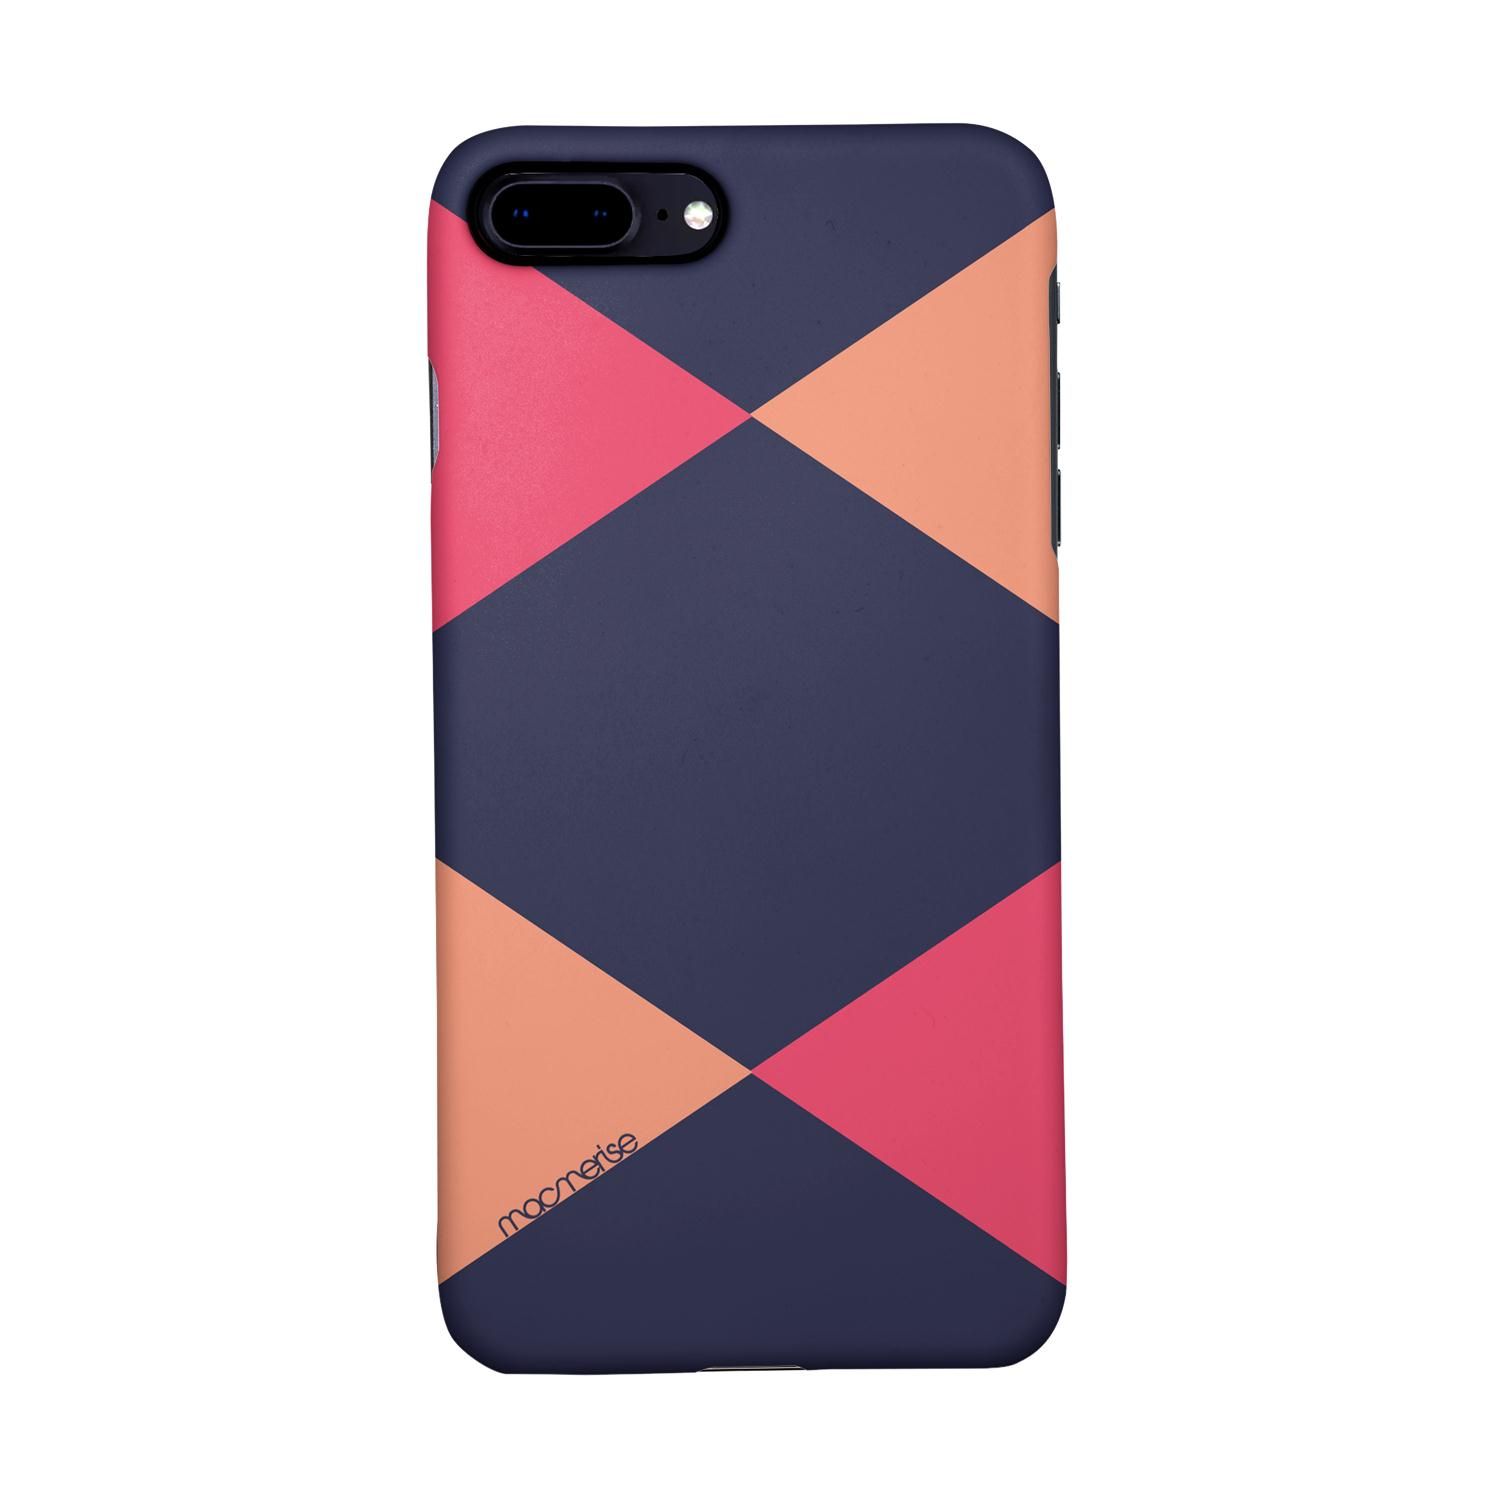 Buy Criss Cross Blupink - Sleek Phone Case for iPhone 8 Plus Online